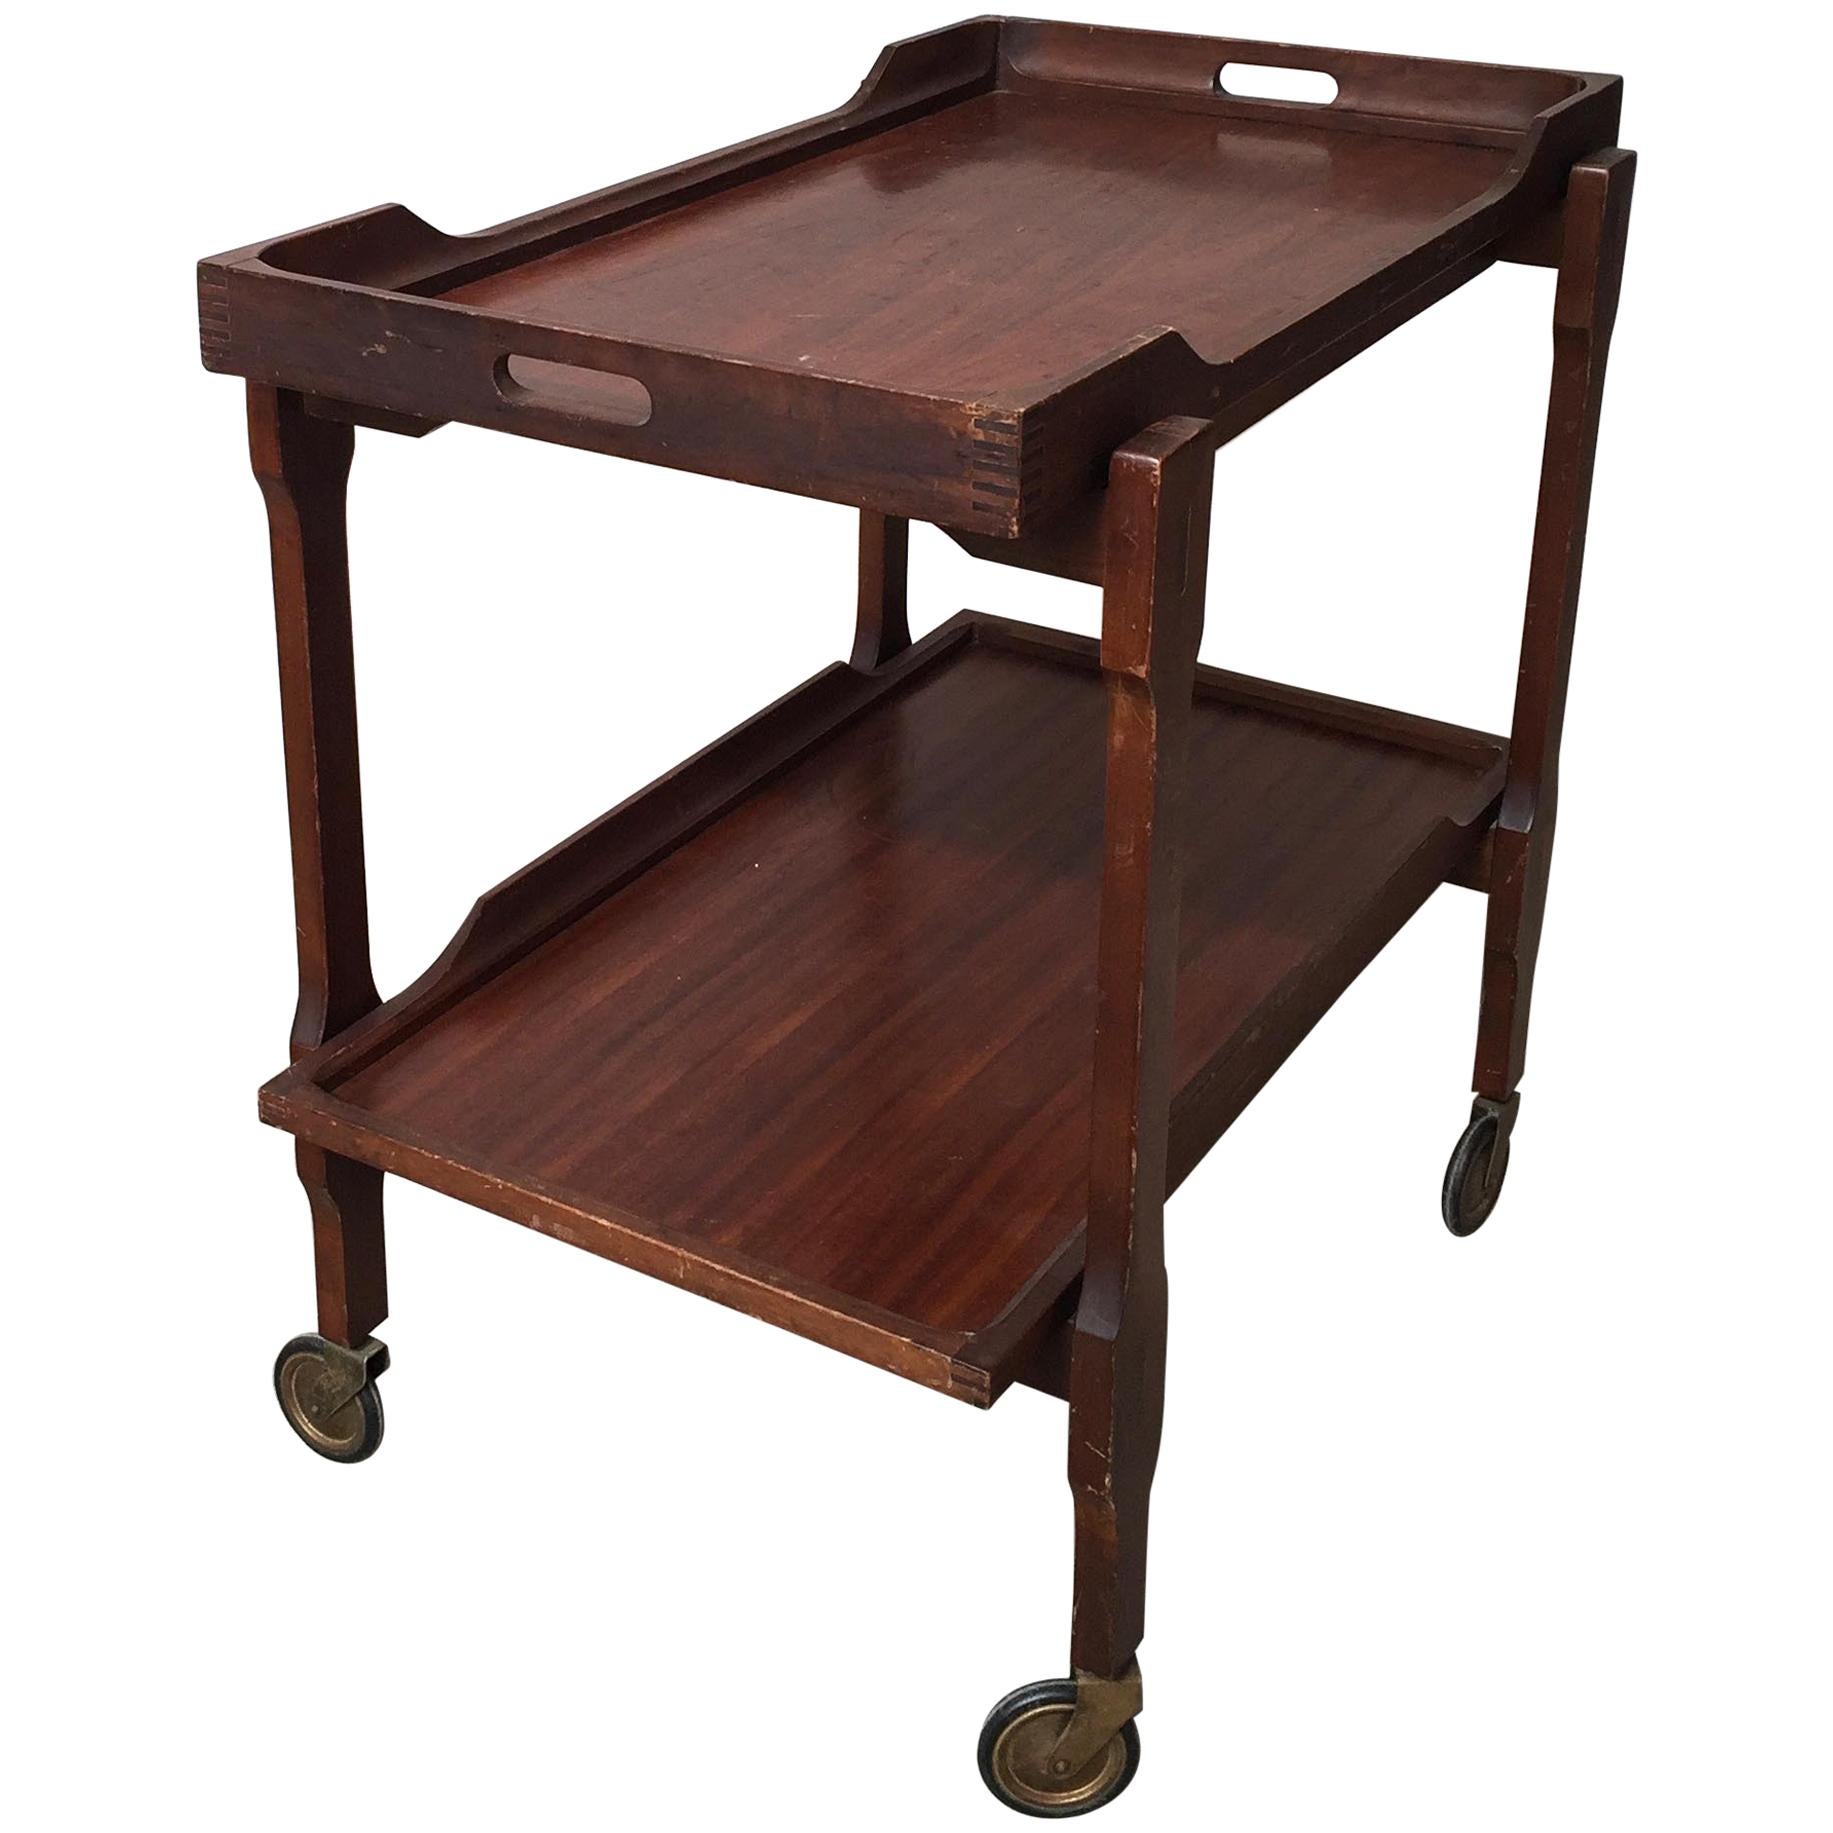 Scandinavian Bar Cart or Trolley in Mahogany Wood with Removable Tray, 1950s im Angebot